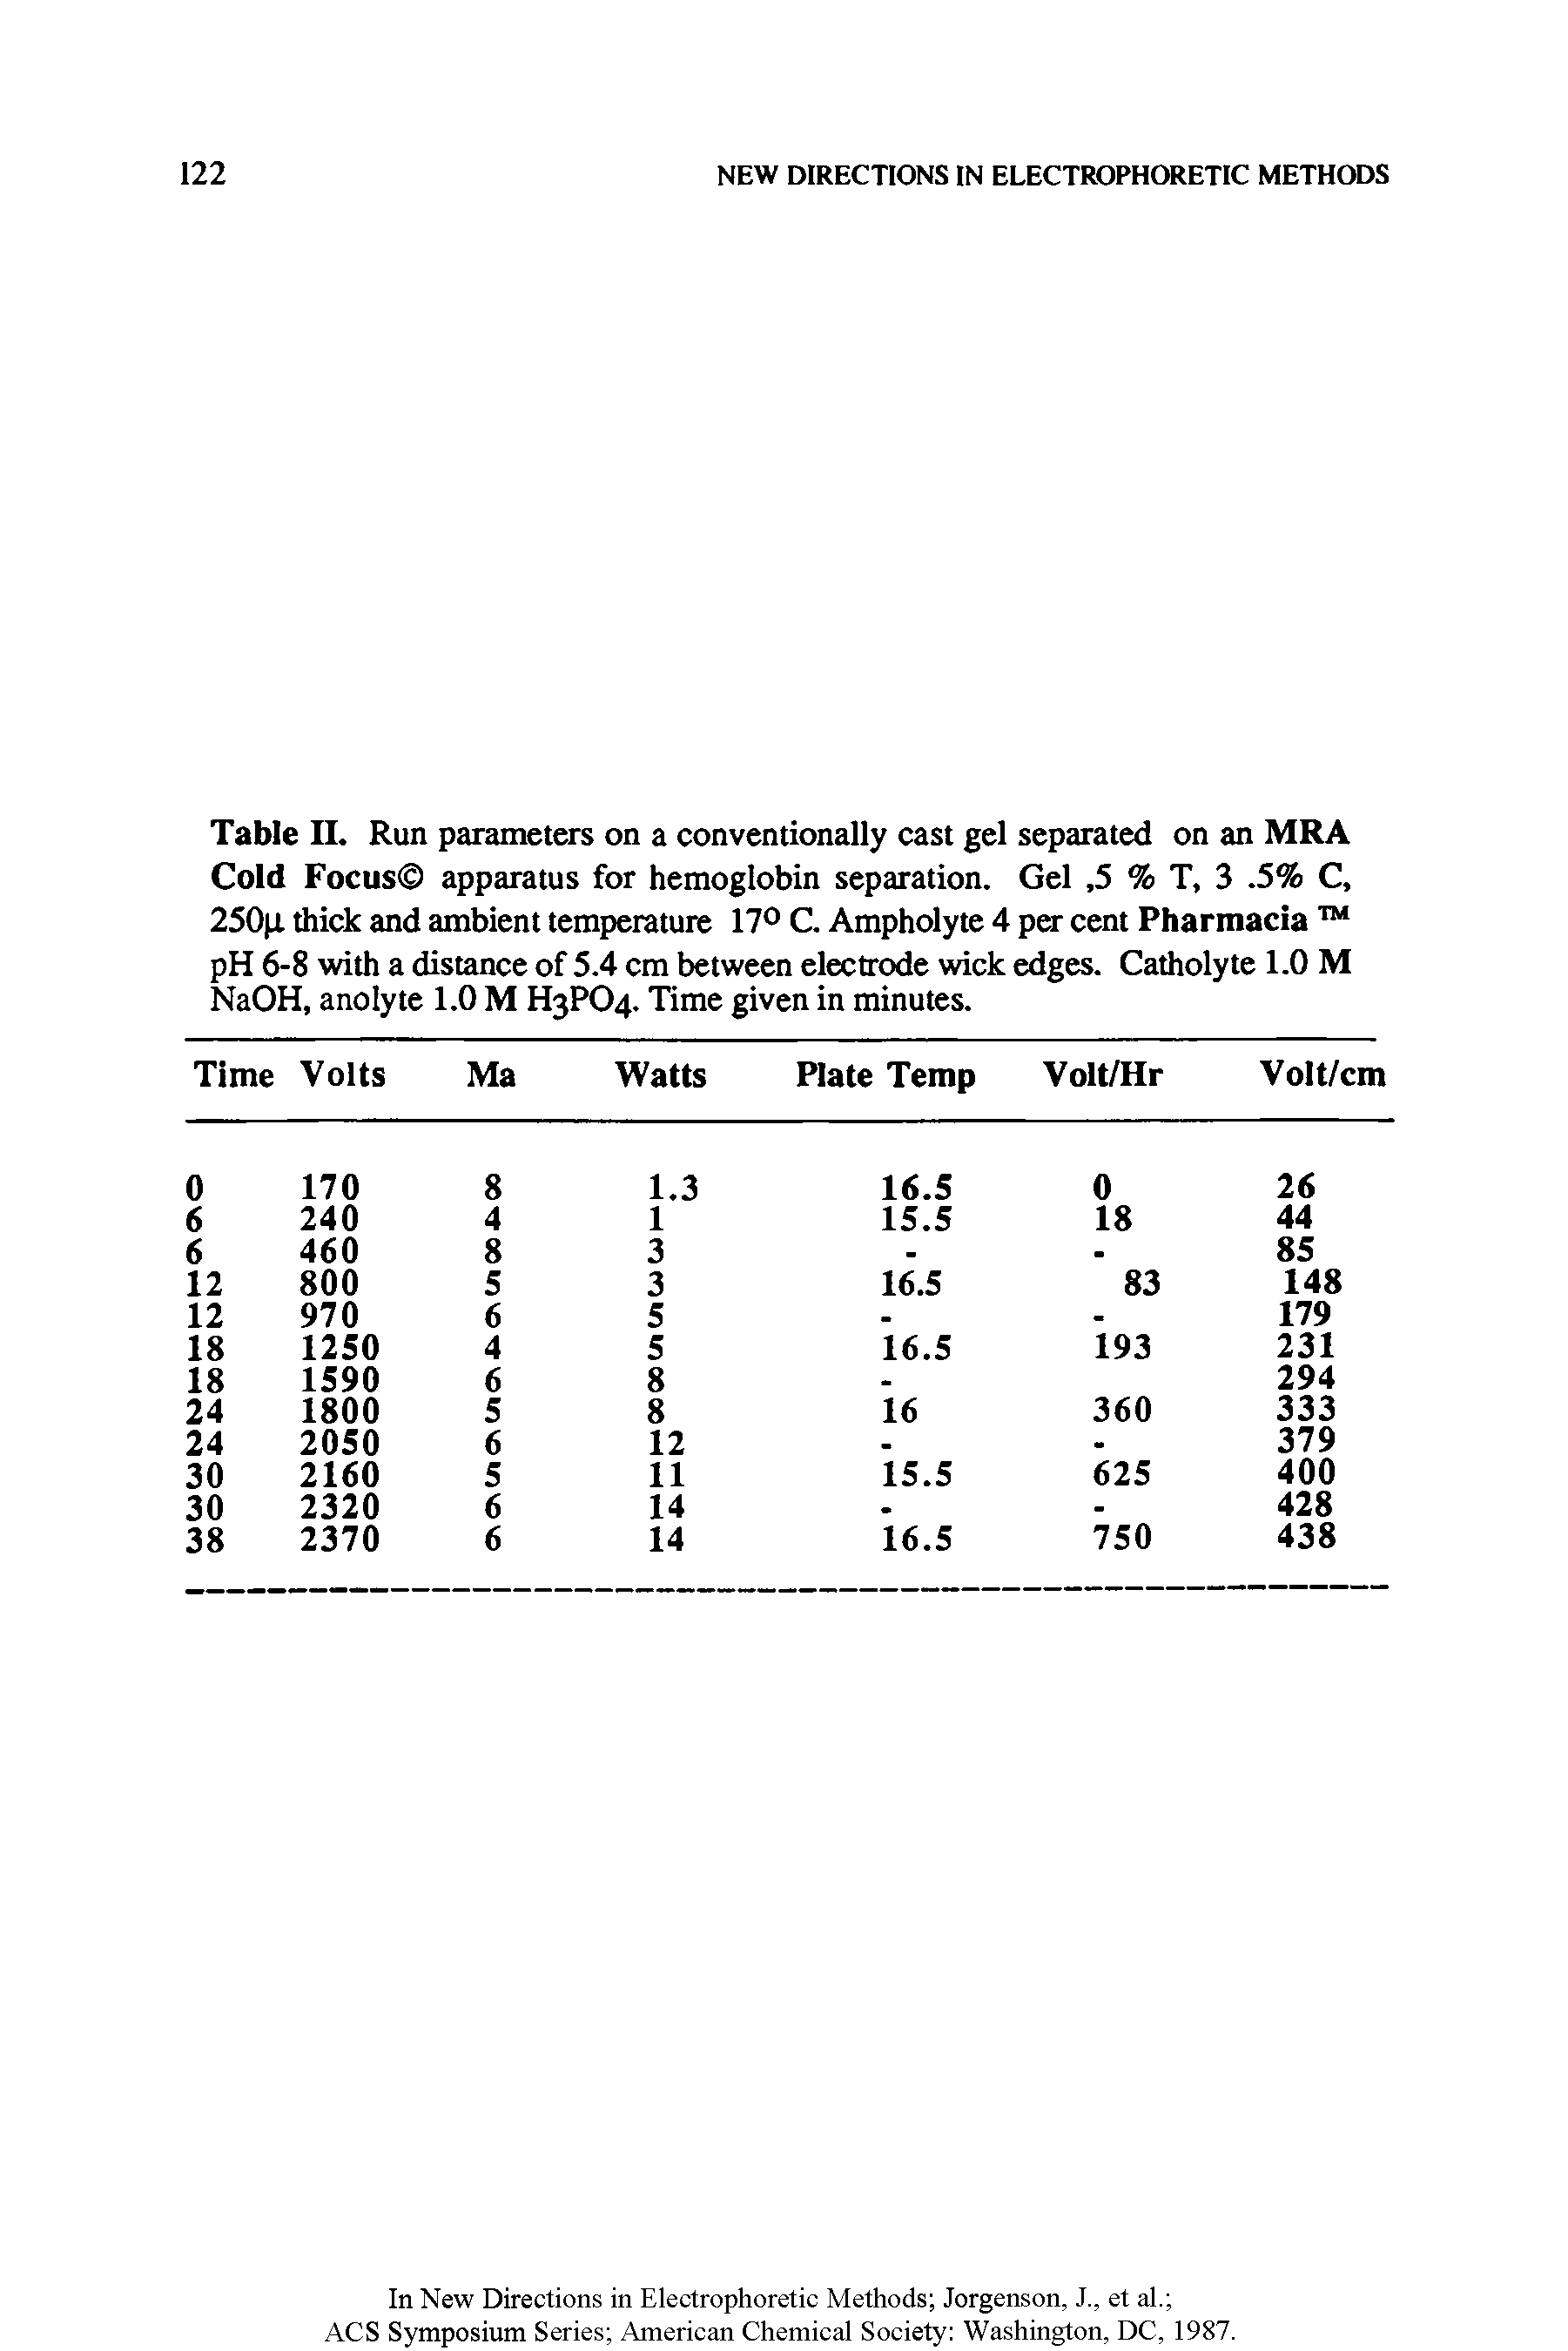 Table II. Run parameters on a conventionally cast gel separated on an MRA Cold Focus apparatus for hemoglobin separation. Gel, 5 % T, 3. 5% C, 250 i thick and ambient temperature 17° C. Ampholyte 4 per cent Pharmacia pH 6-8 with a distance of 5.4 cm between electrode wick edges. Catholyte 1.0 M NaOH, anolyte 1.0 M H3PO4. Time given in minutes.